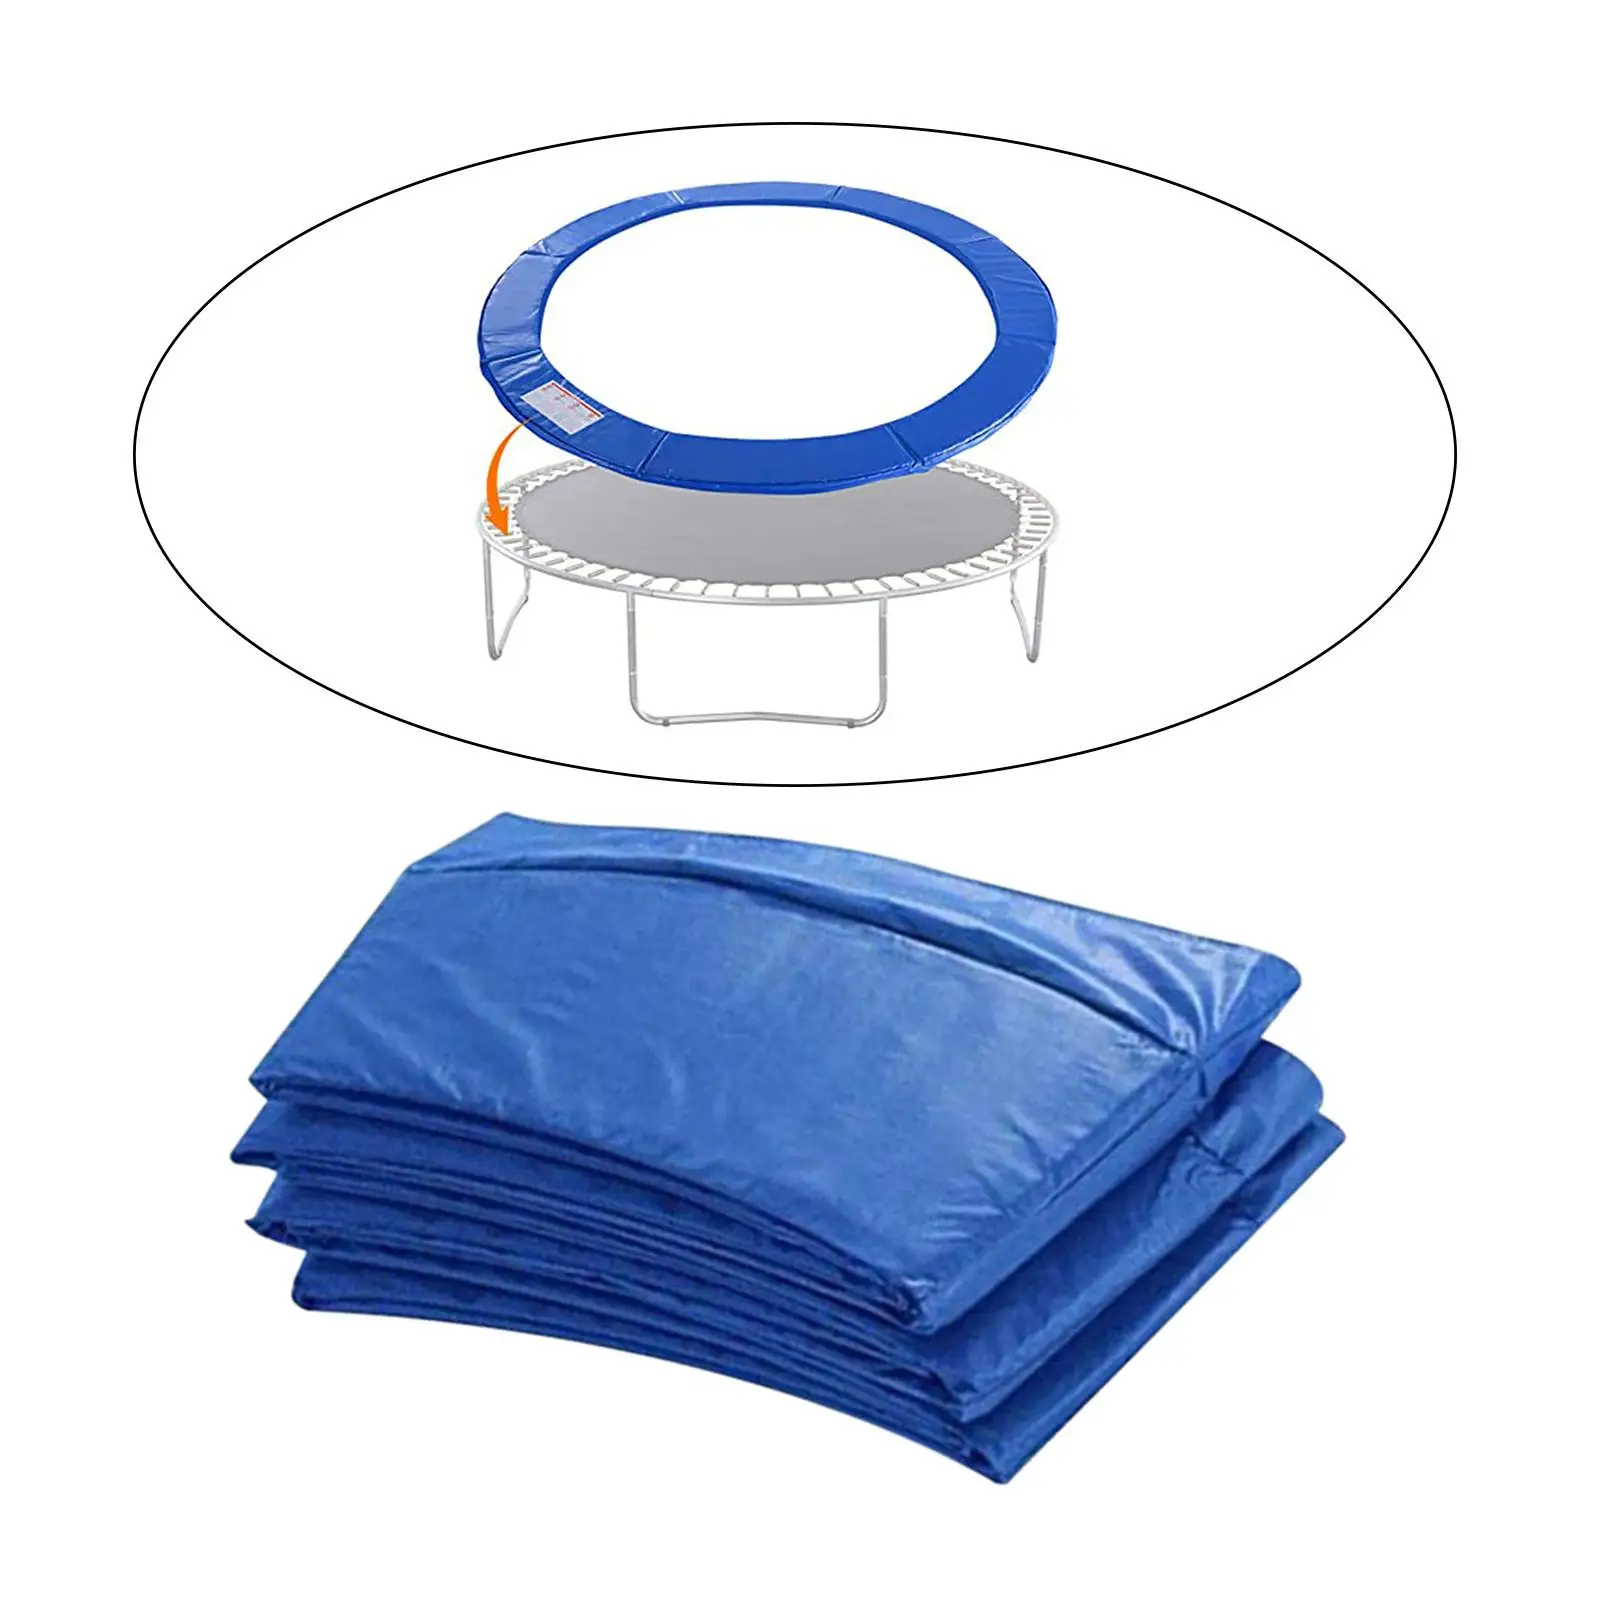 Trampoline Pad Replace Fits Round Trampoline 12ft Trampoline Accessories Safety Padding Surround Guard Trampoline Edge Cover